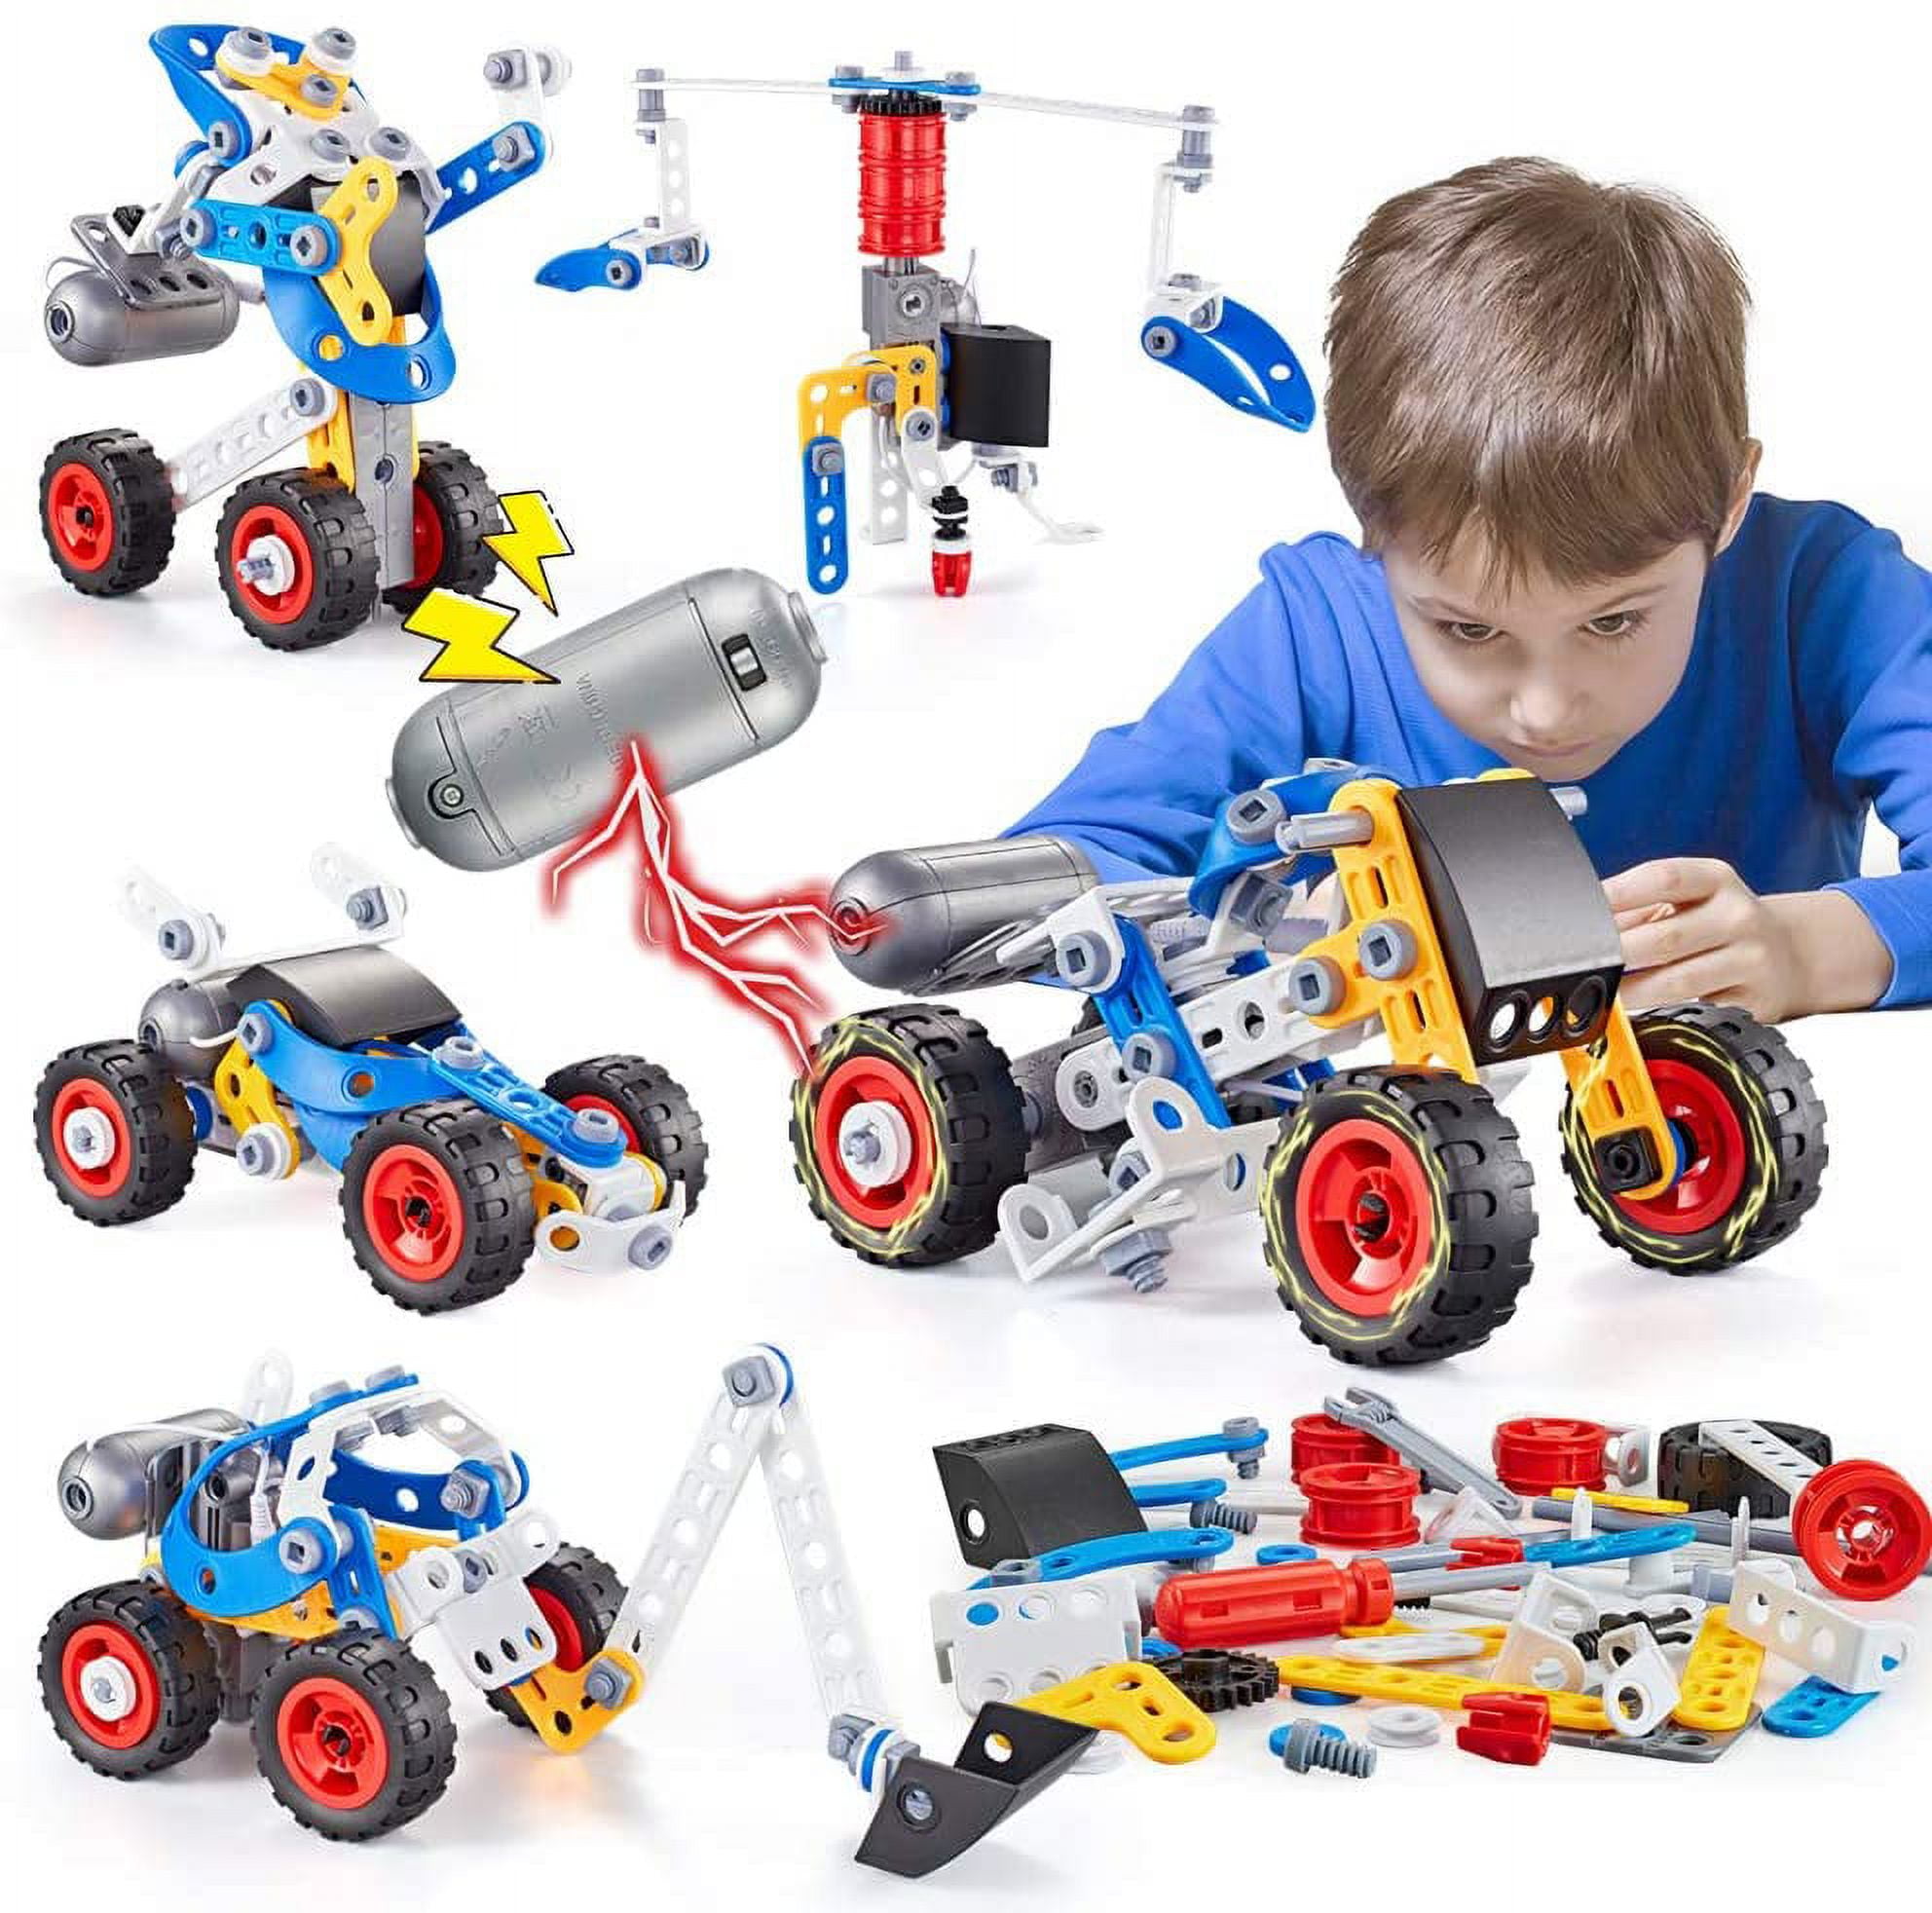 Marom - Play A Lot Building Toys for Boys Age 6-8 Year Old Boy Gift Best Educational Toys for Kids 5-7 Stem Building Toy for Boys 8-12 Engineering